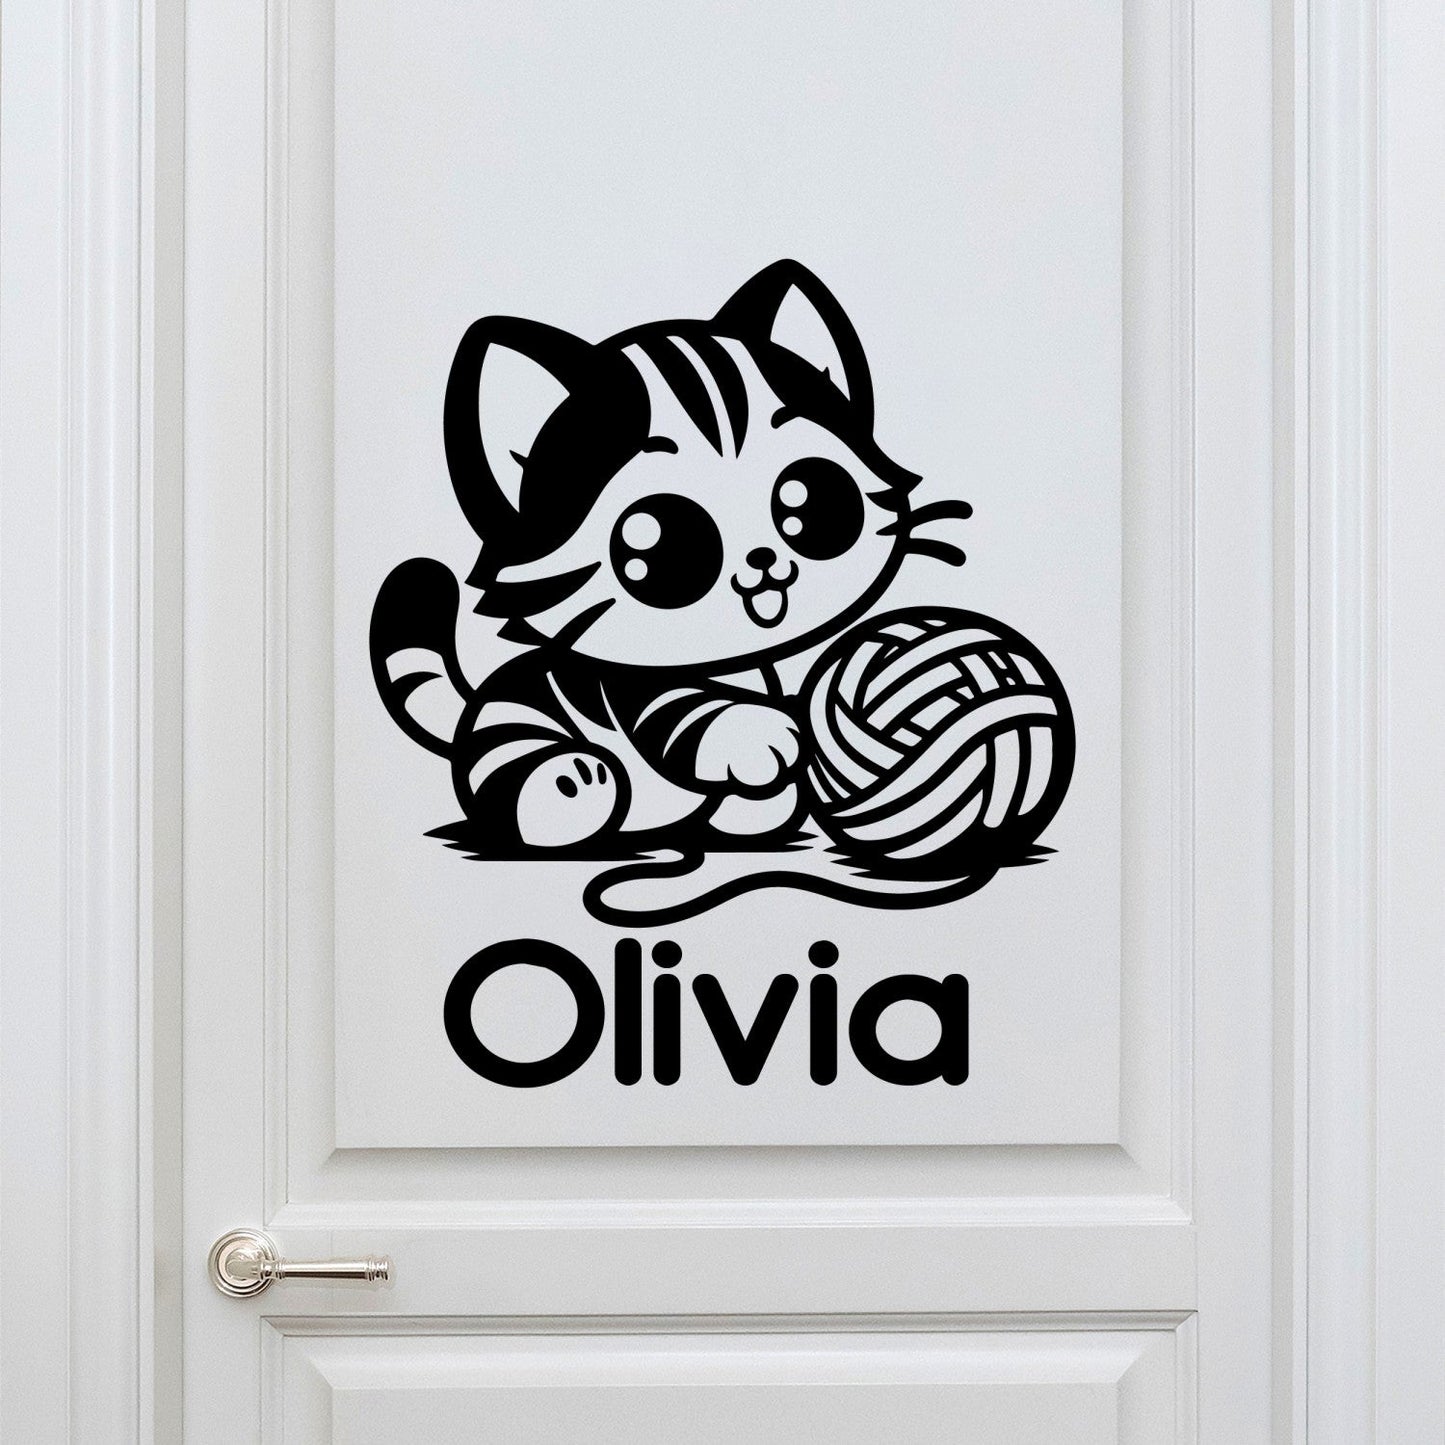 Cat Decals for Walls - Wall Stickers Animals - Personalized Name Decal for Nursery - Baby Wall Stickers with Animal Wall Decals - Cat Wall Stickers